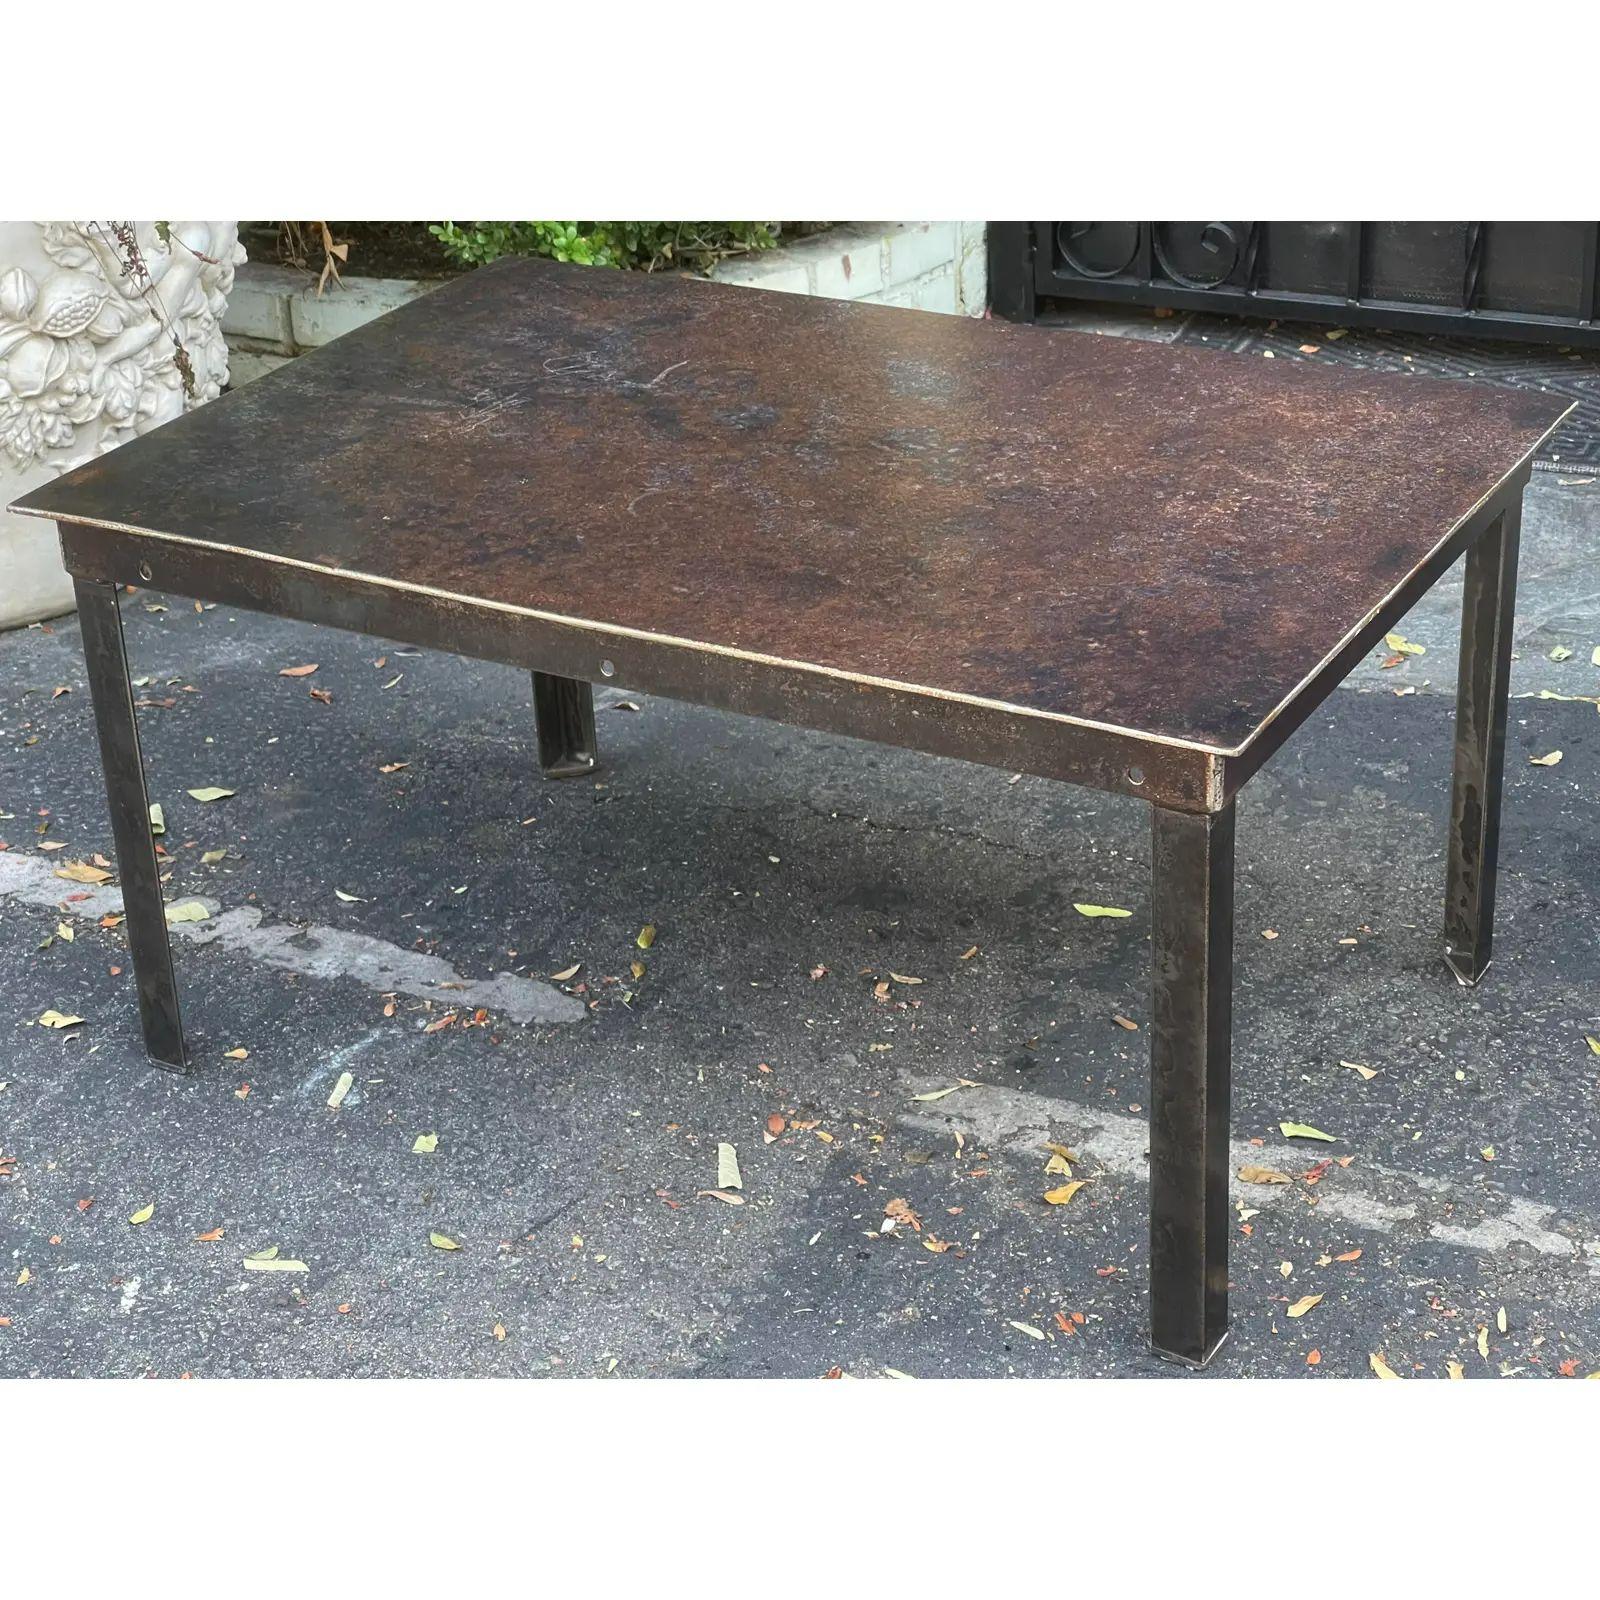 Modern Pounded Iron Industrial Chic Coffee Cocktail Table. Simple and elegant with a patinated finish.

Additional information: 
Materials: Iron
Color: dark bronze
Period: 1990s
Styles: Industrial, Modern
Table Shape: Rectangle
Item Type: Vintage,